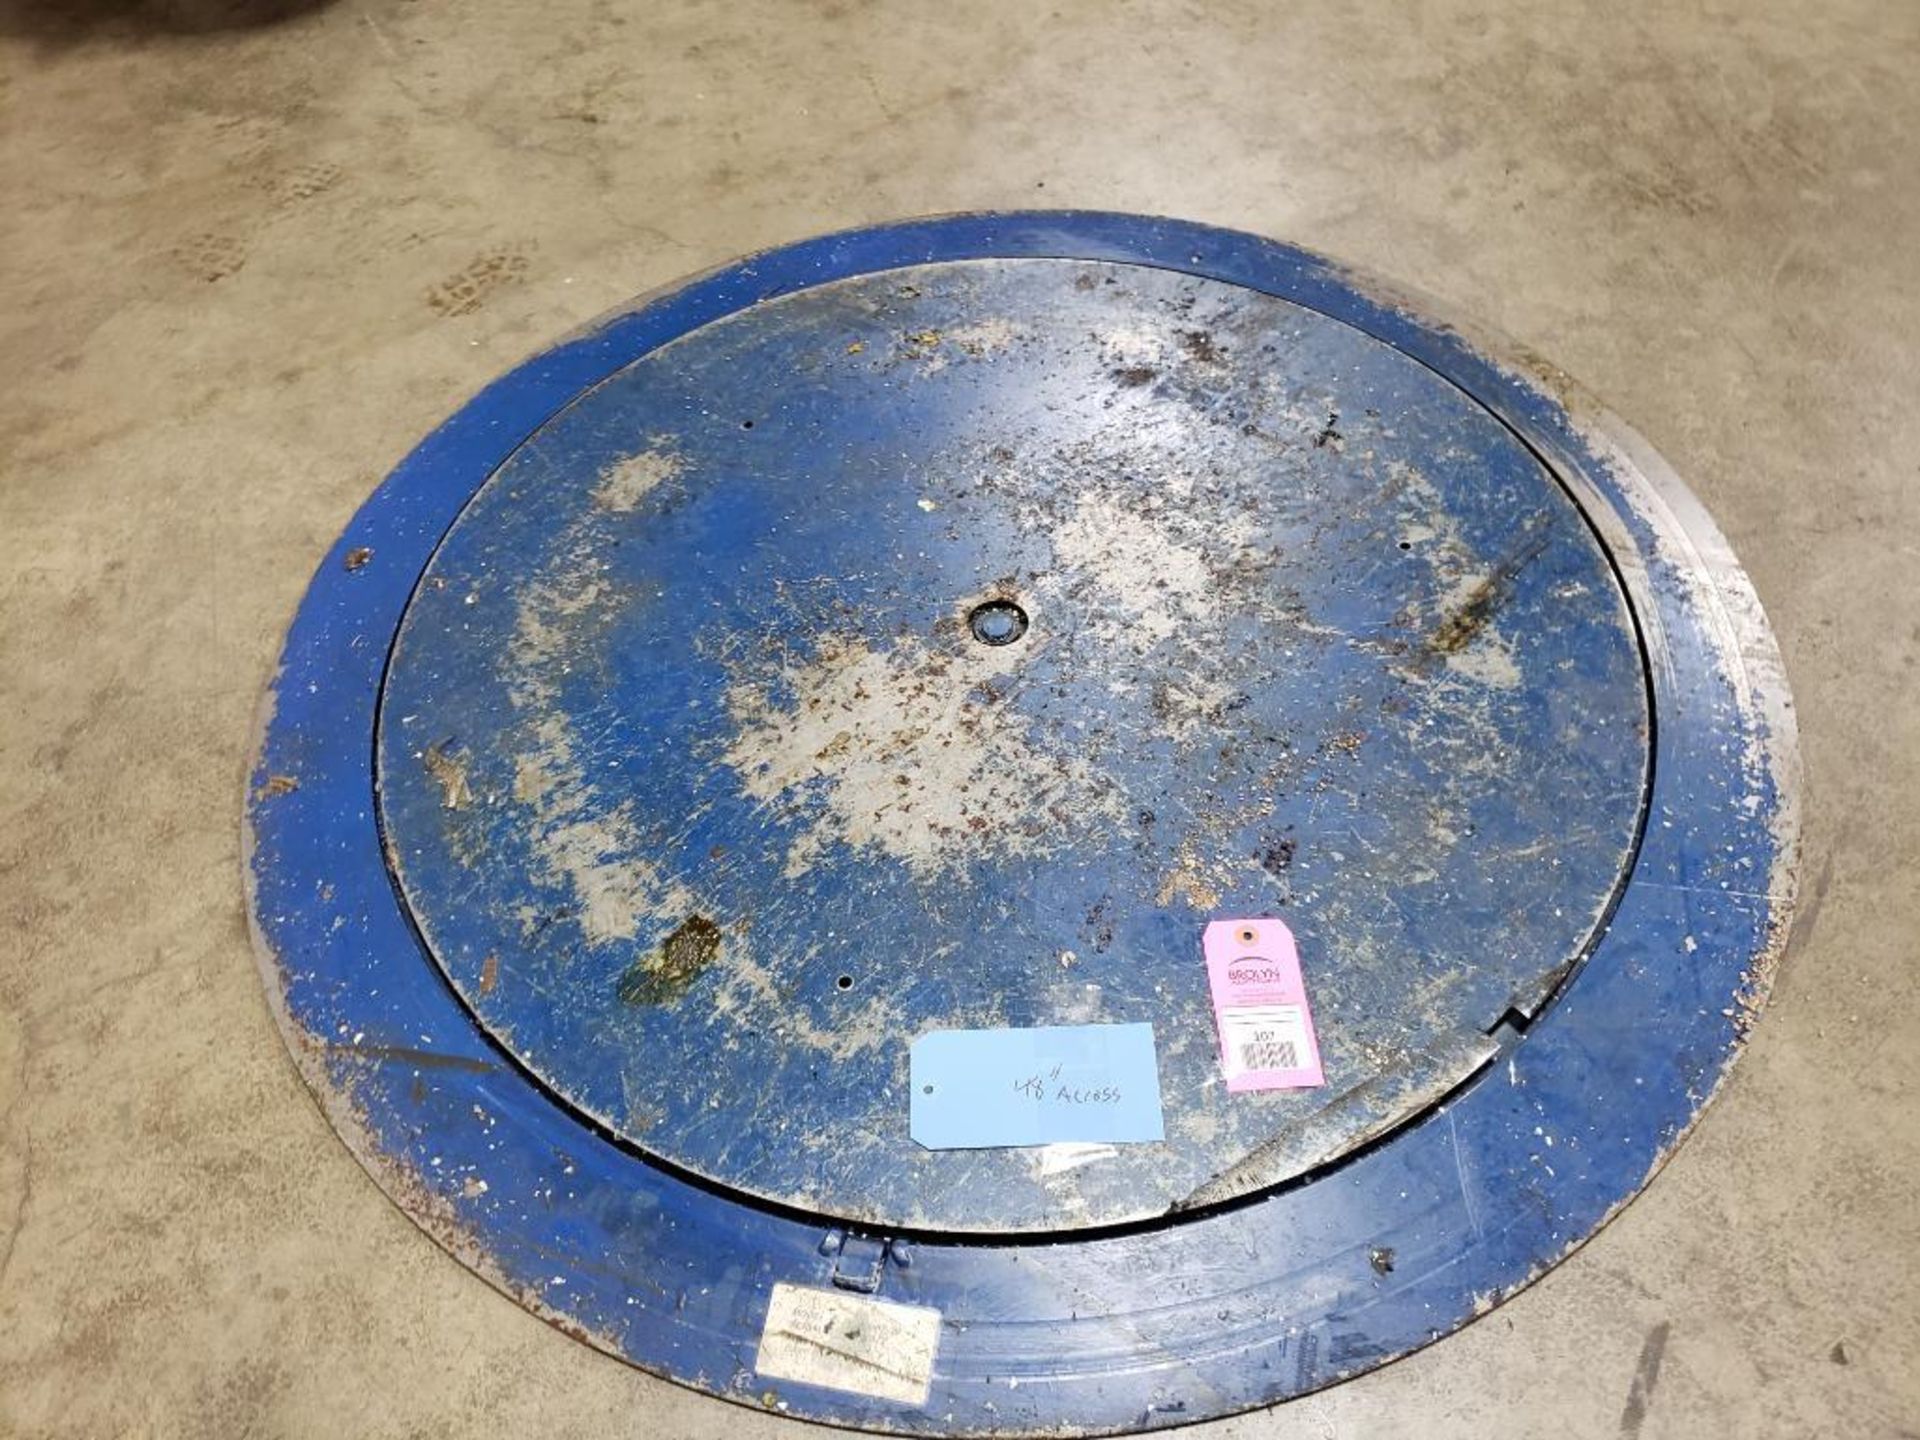 48" around Pallet carousel skid turntable. Appears to be Global Industrial.